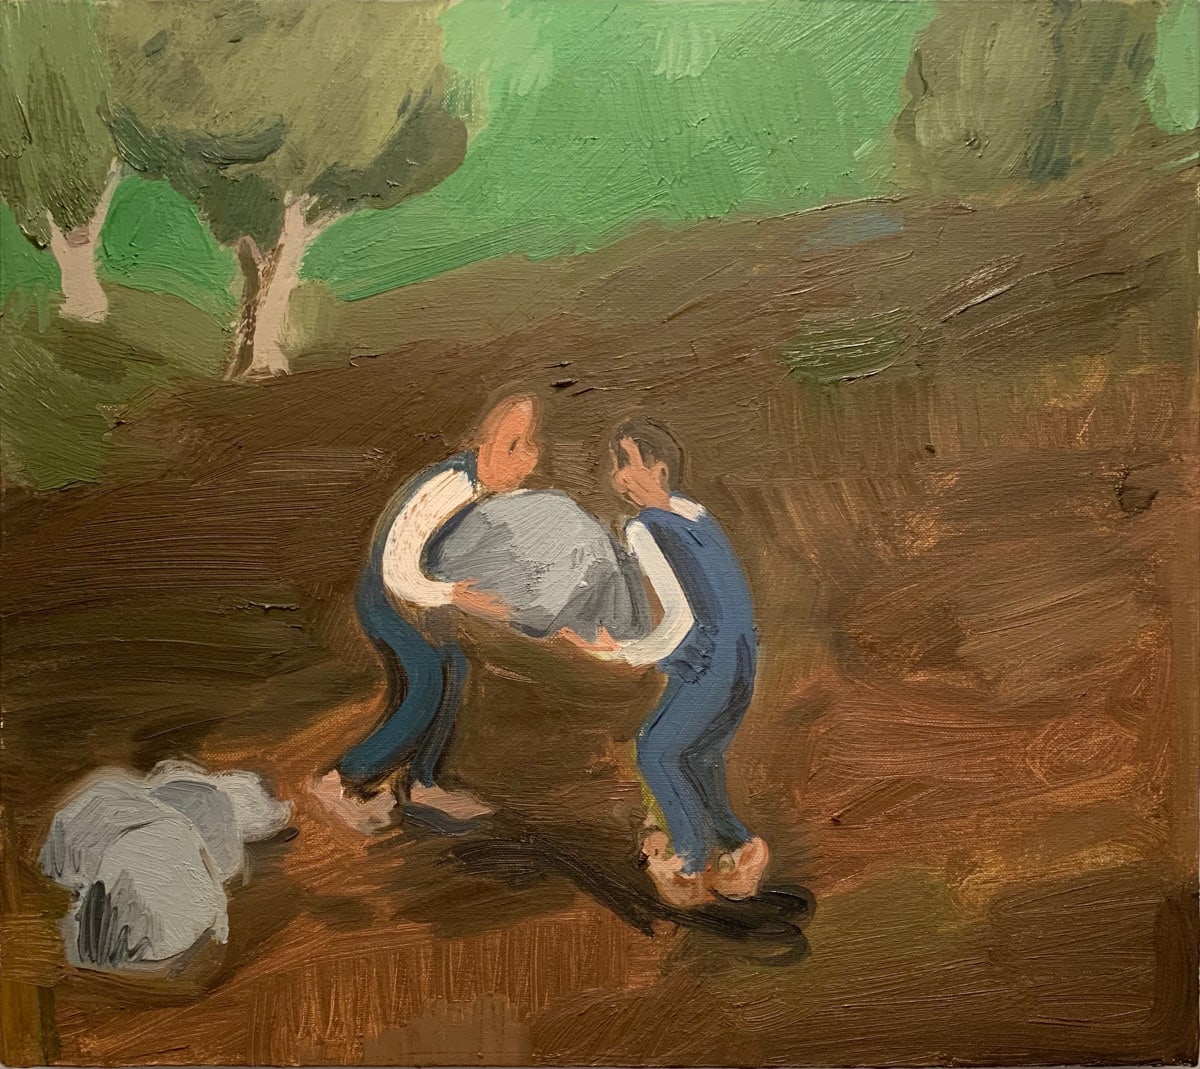 Two Man Job (moving the boulder) by Jane Corrigan  Image: Two Man Job (moving the boulder)